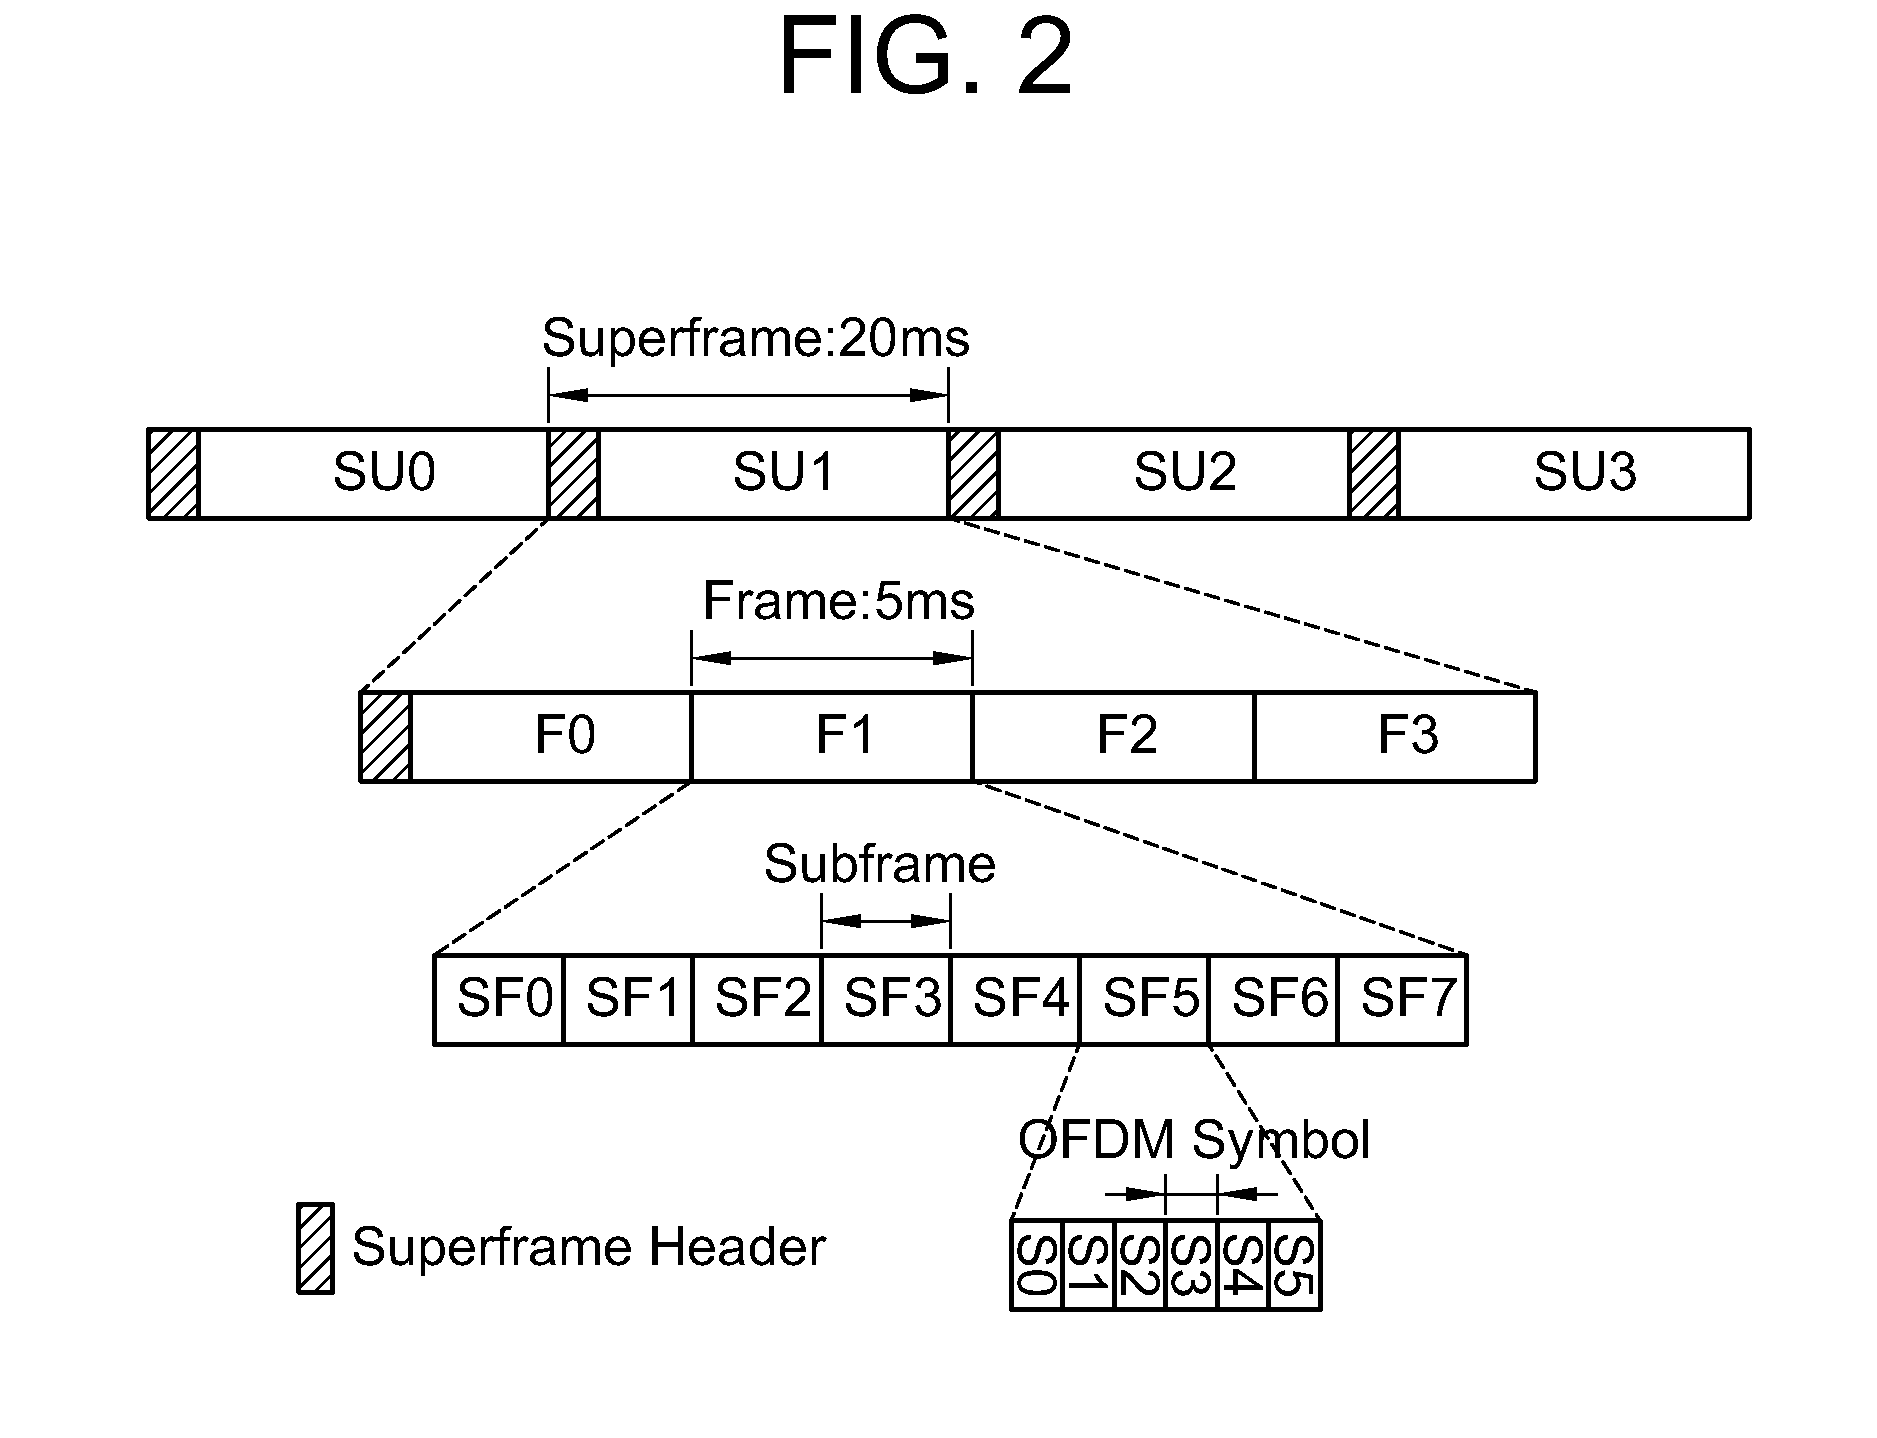 Method for conducting HARQ with a wireless communications system